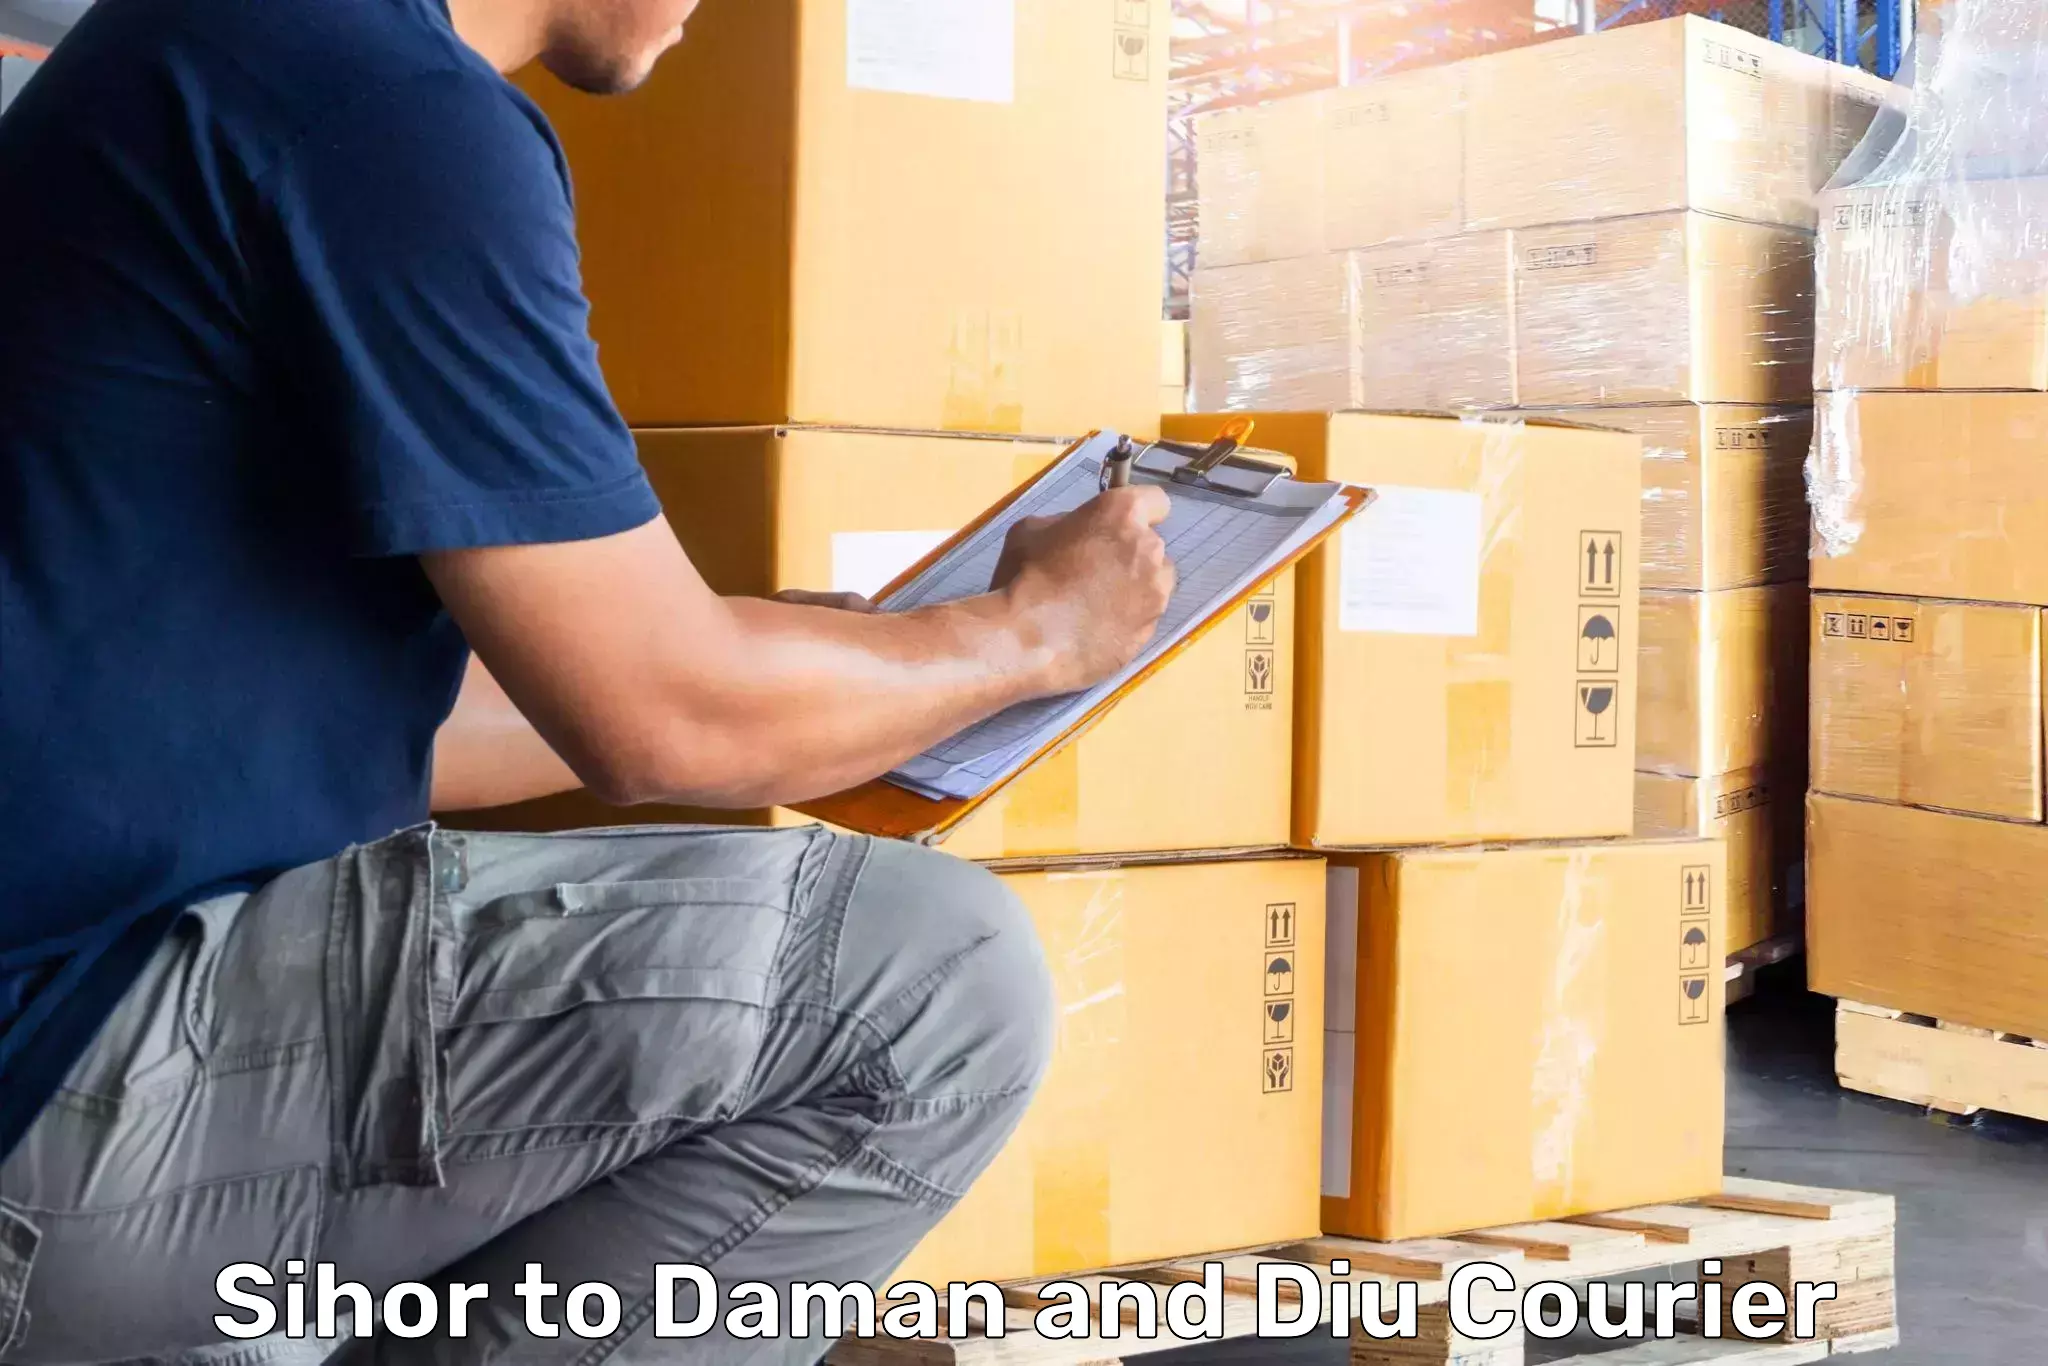 Hassle-free luggage shipping in Sihor to Daman